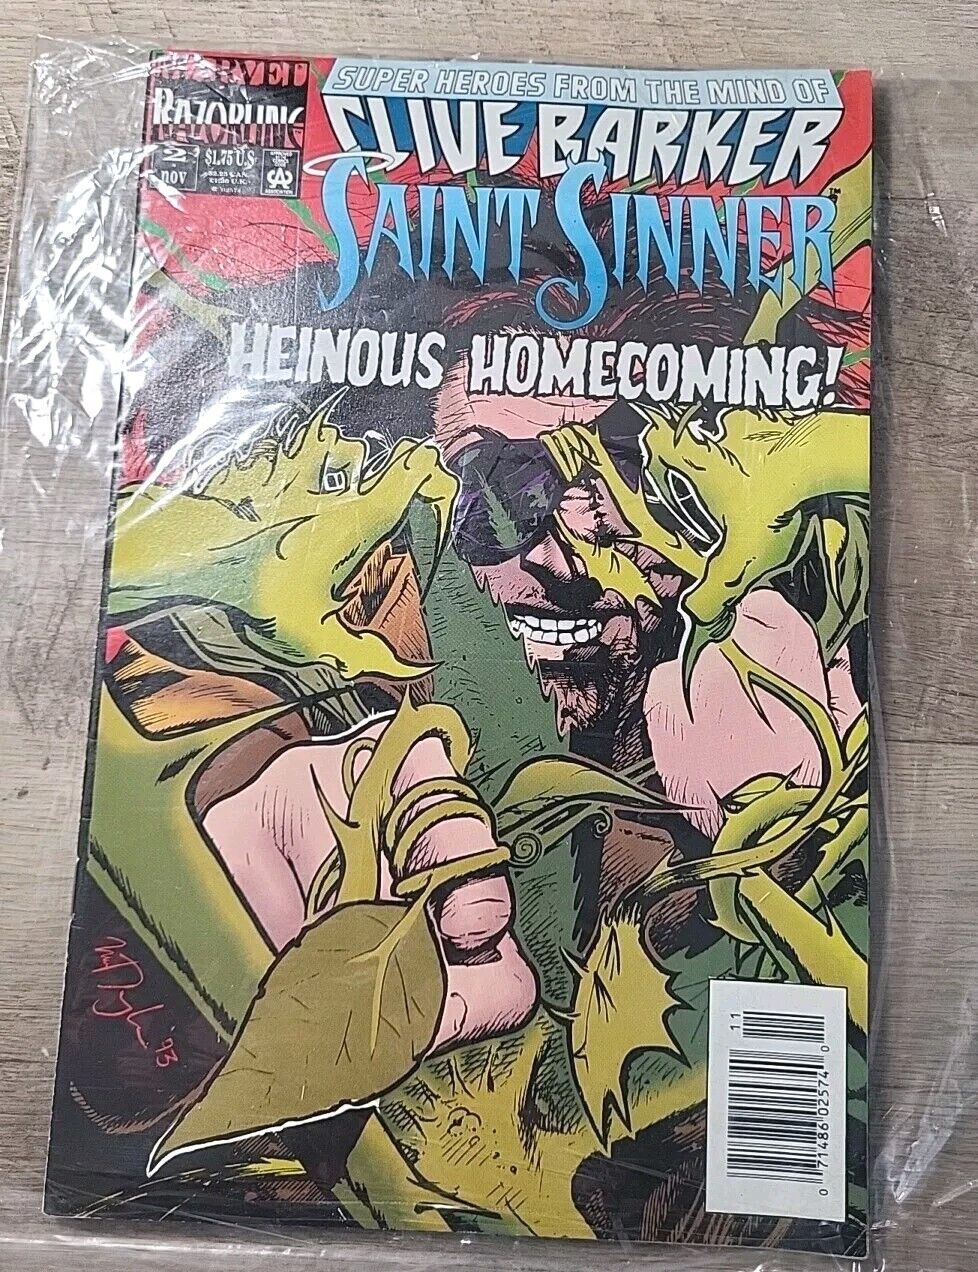 Saint Sinner # 2 - Super Heroes From The Mind Of Clive Barker,  (1993)